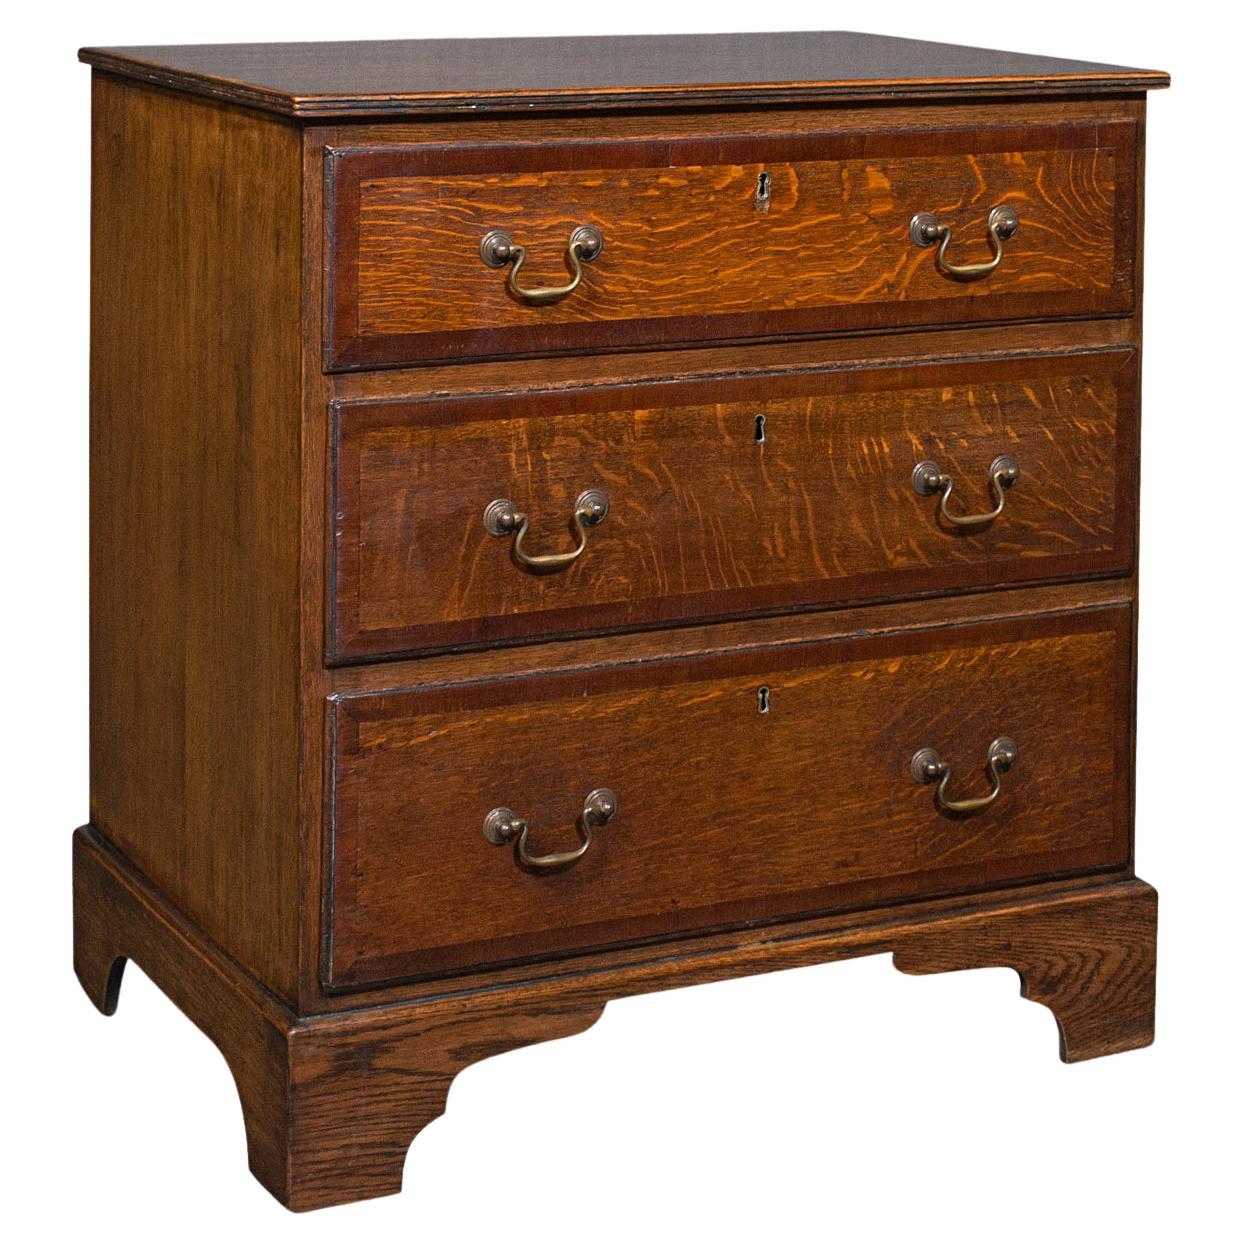 Antique Compact Chest of Drawers, English, Oak, Bedside Cabinet, Georgian, 1800